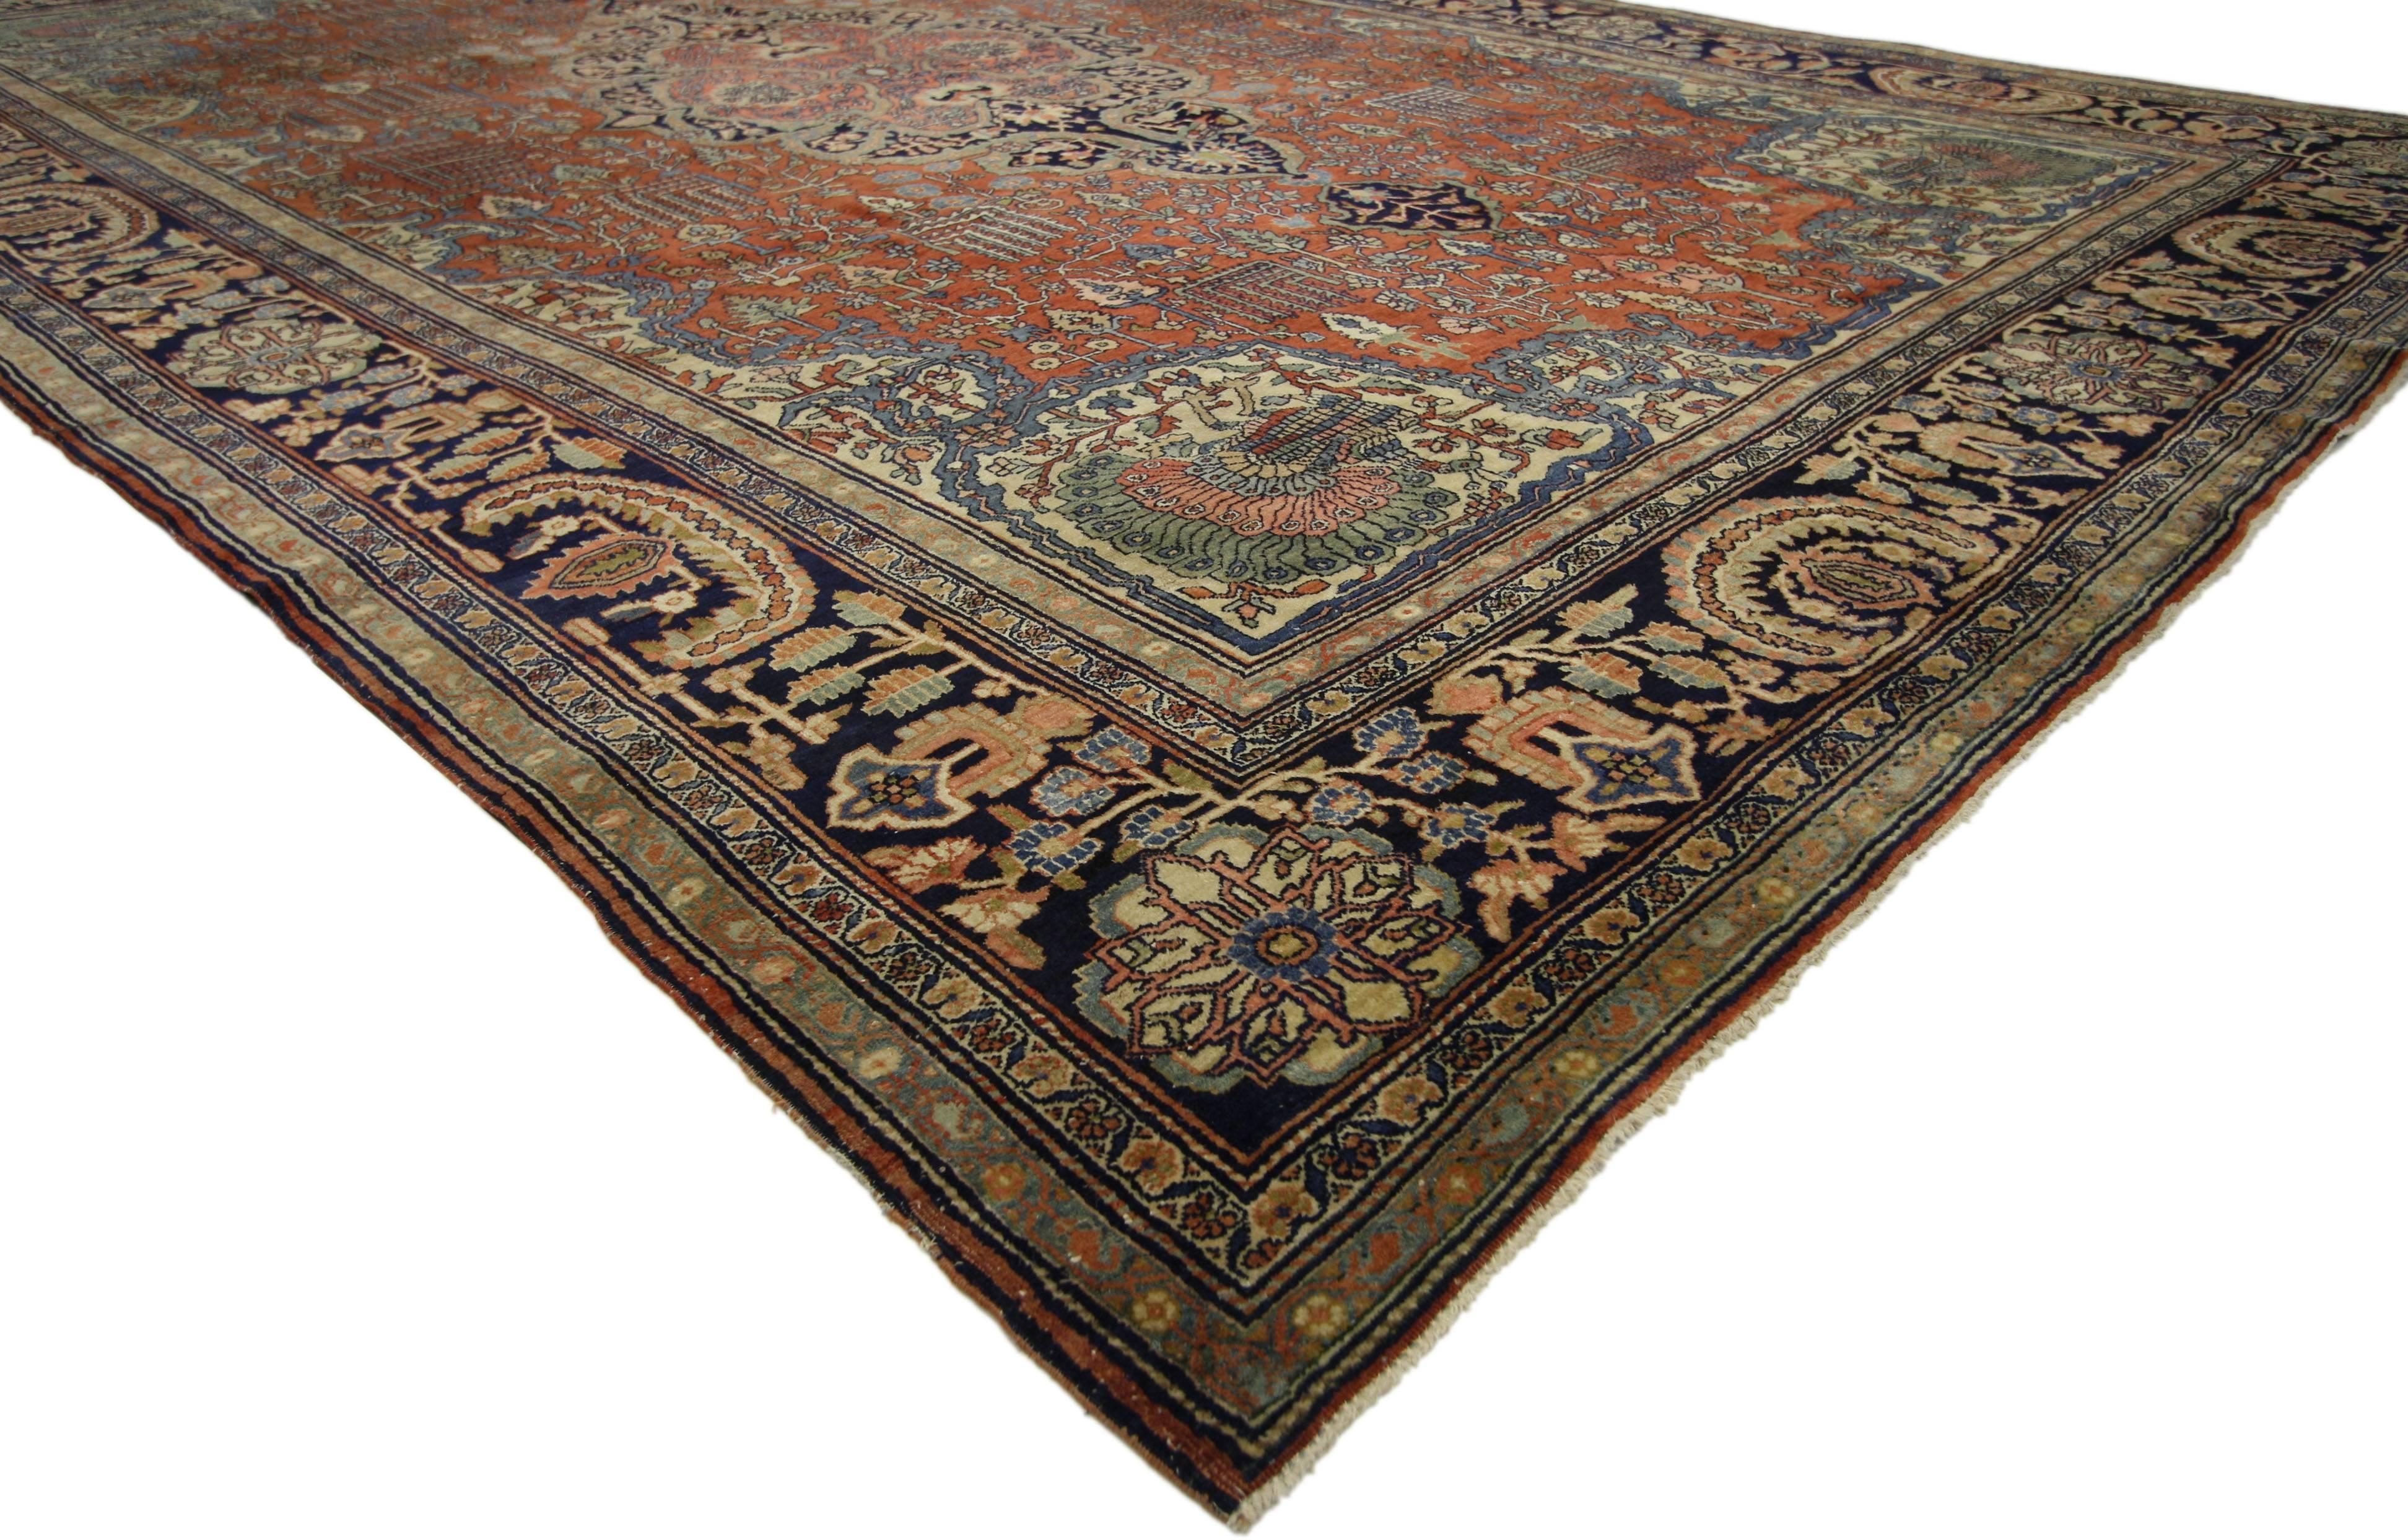 73477, late 19th century antique Persian Sarouk Farahan Rug, 09'00 x 13'02.
The architectural elements of naturalistic forms combined with Arts & Crafts style, this hand knotted wool late 19th century antique Persian Farahan rug astounds with its